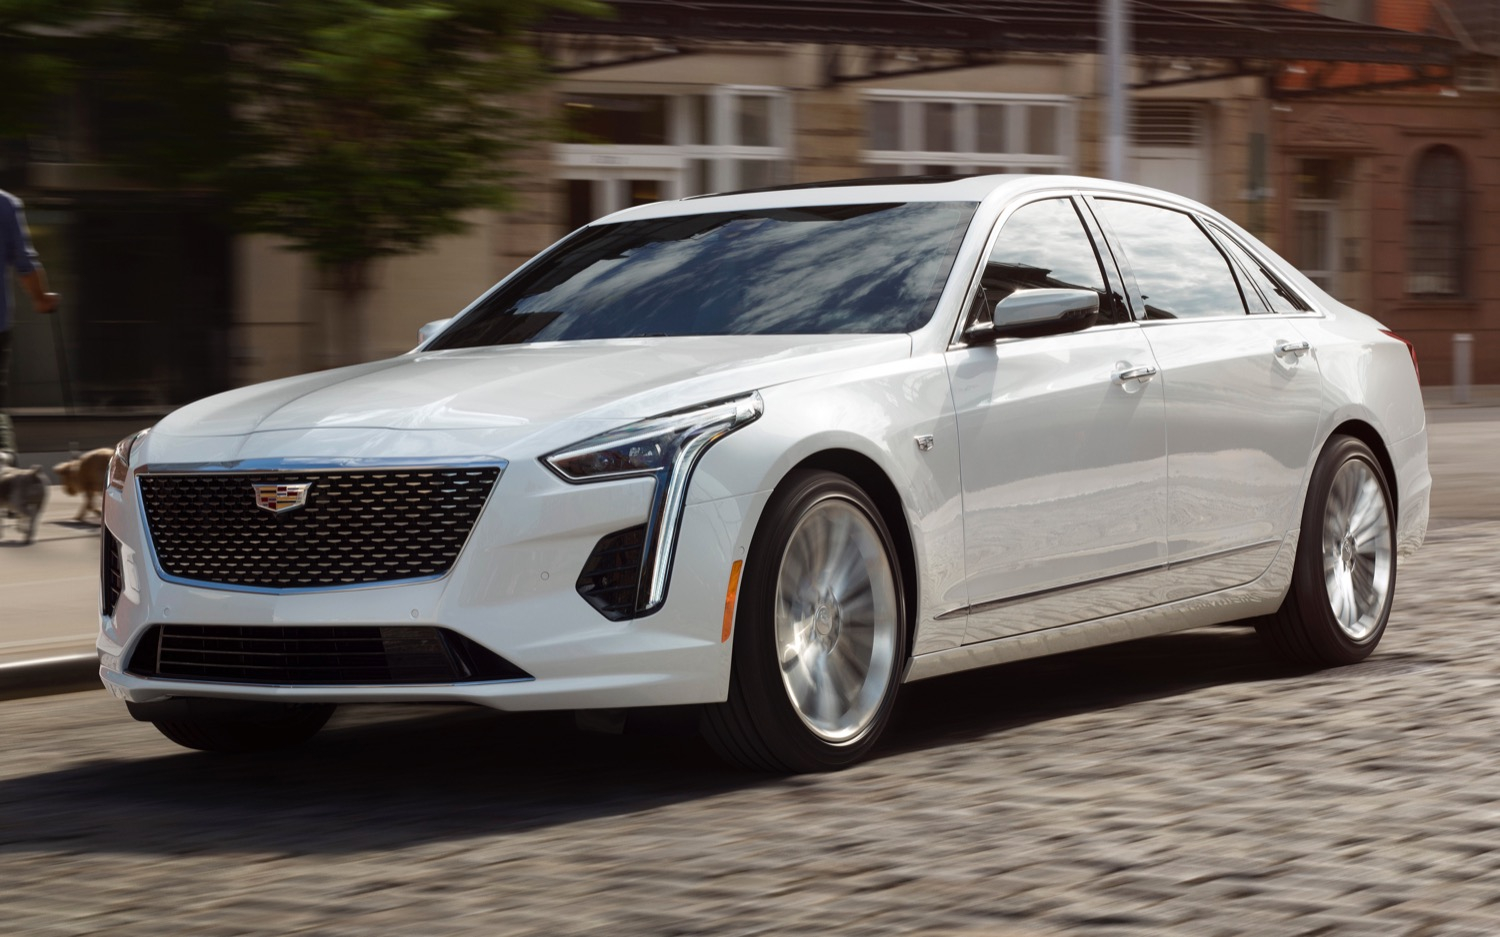 Is There A New 2022 Cadillac Ct6 Weight, Price, Engine Options